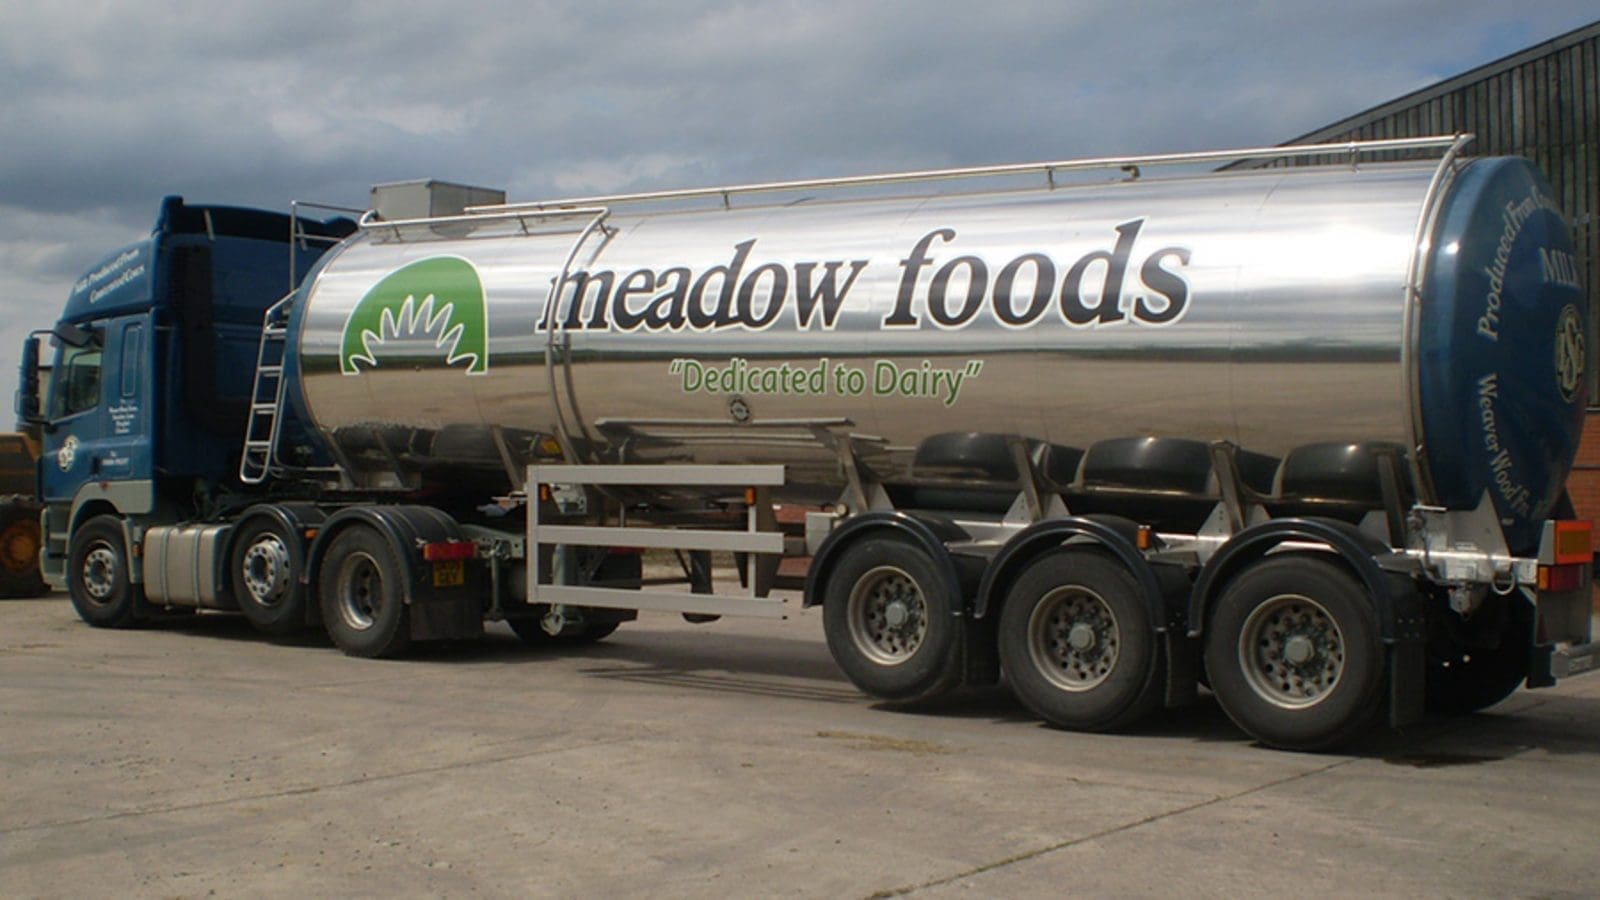 Meadow Foods announces ambition to produce the lowest carbon footprint milk in the UK